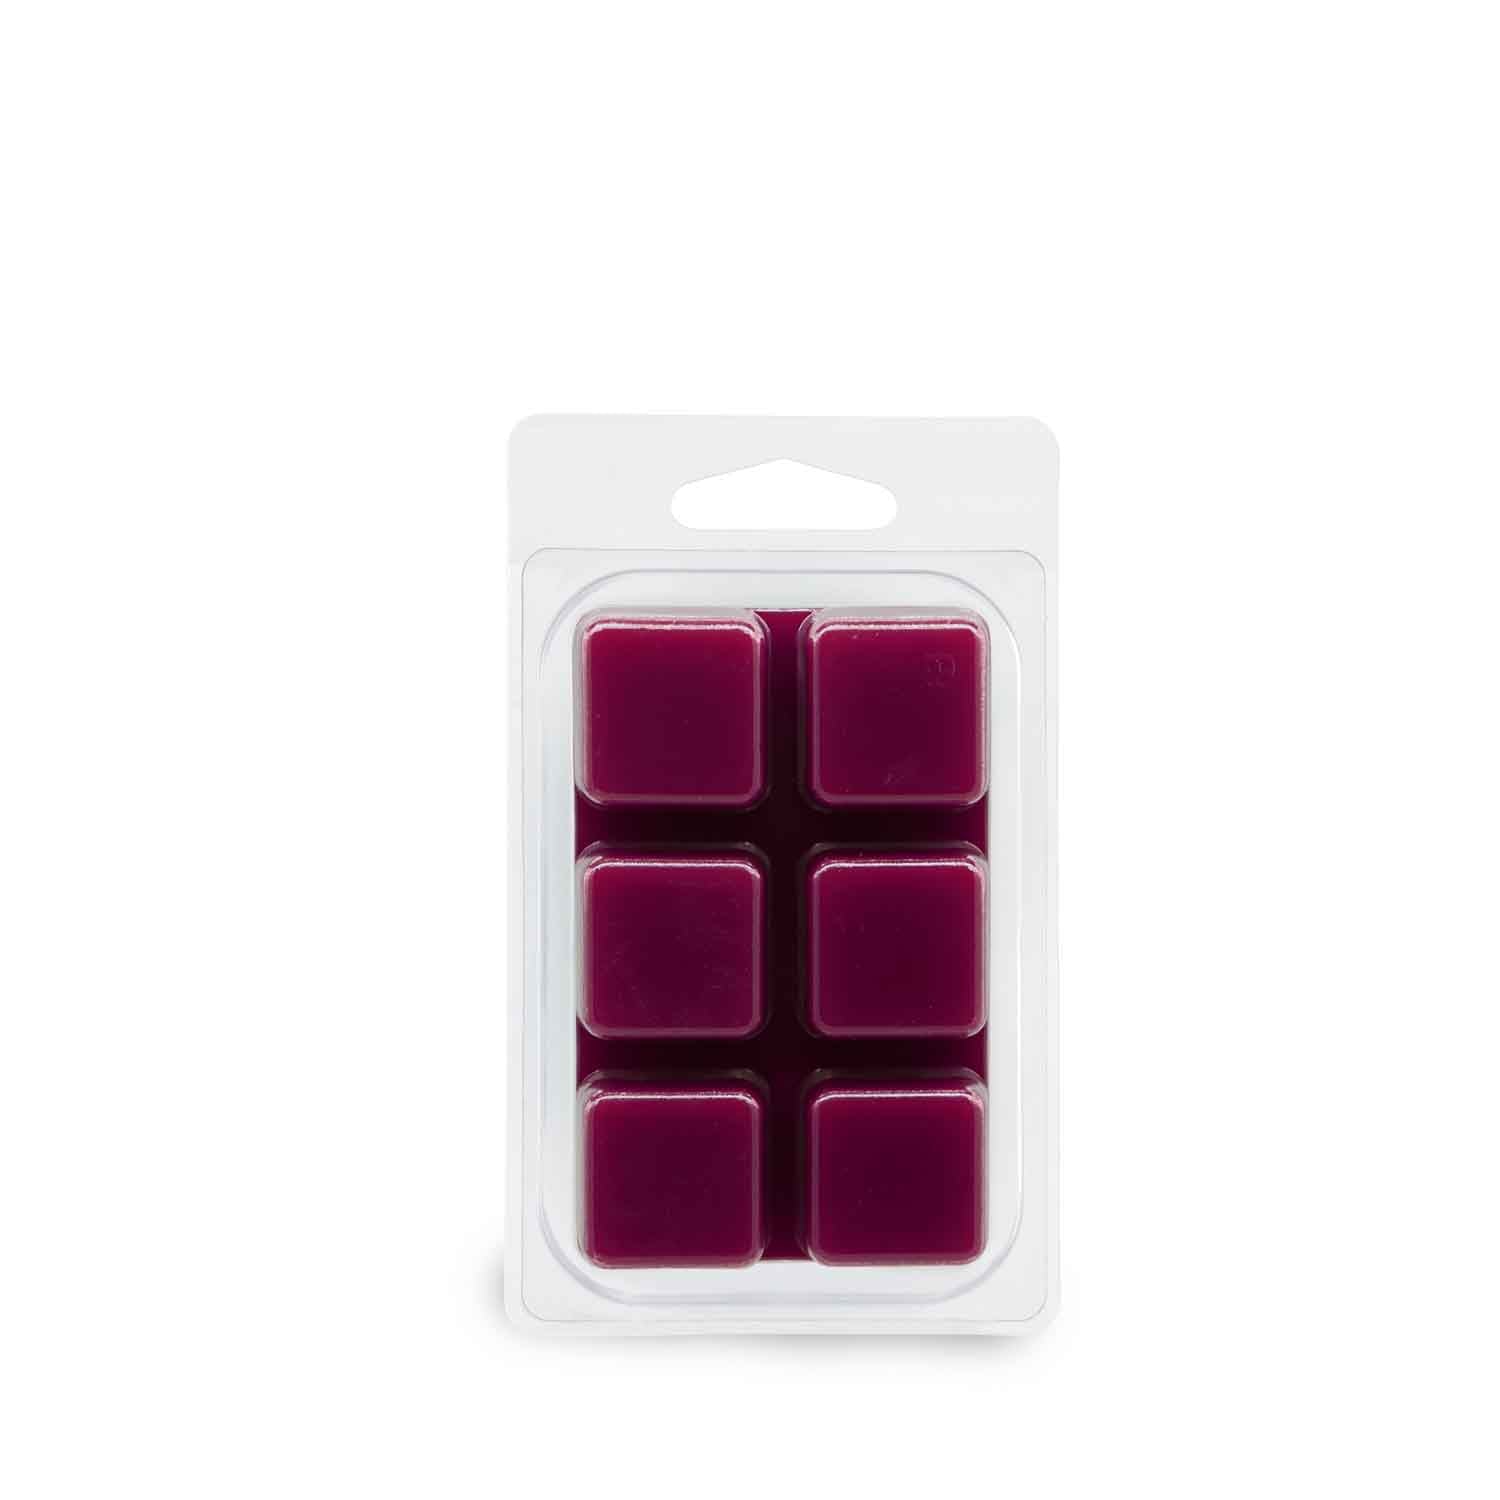 A pack of Love & Adore Scented Wax Melt (2.5 oz) cubes on a white background.